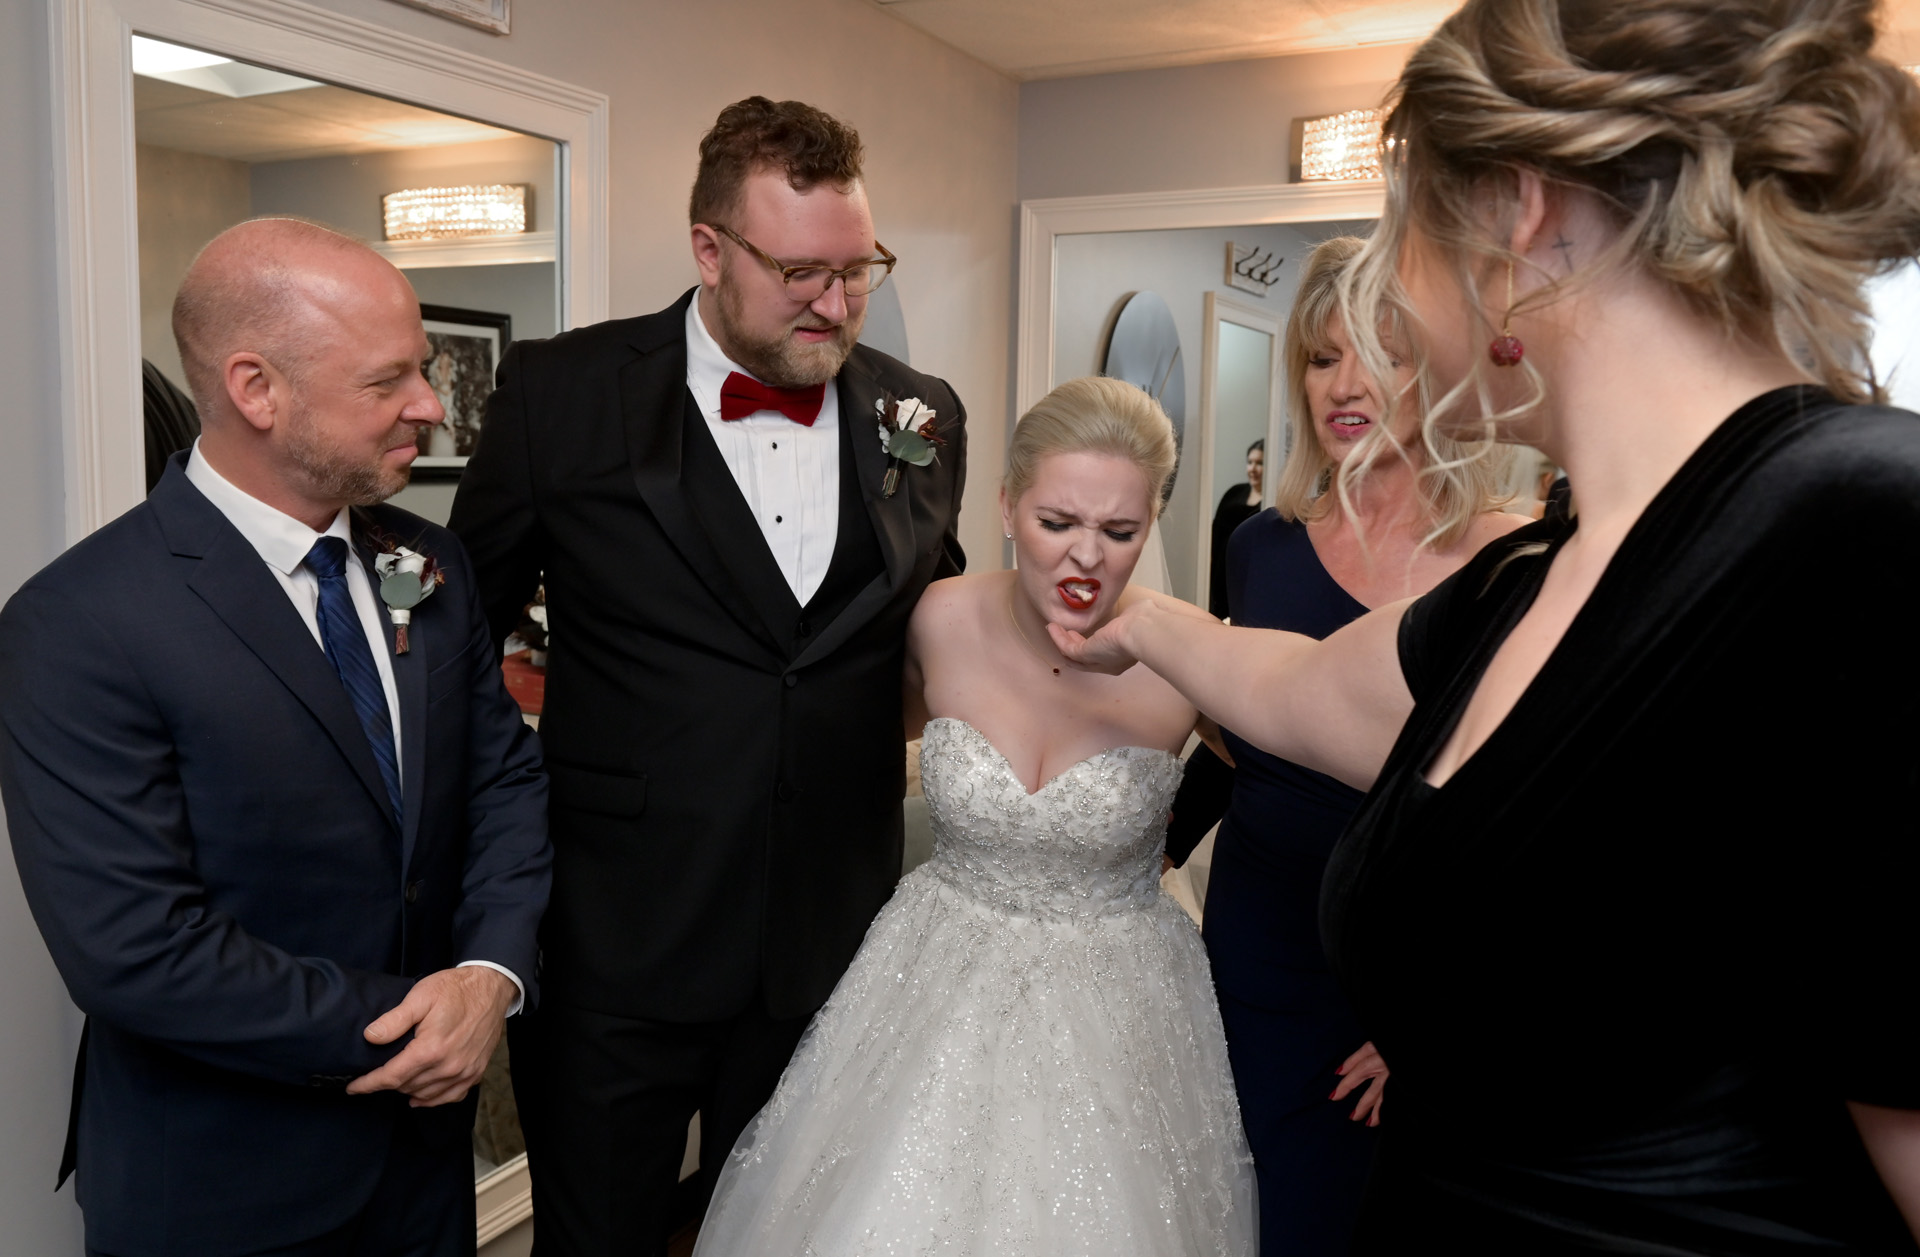 The bride spits out her gum into the maid of honor's hand during an impromptu family photo at a church in Macomb, Michigan.